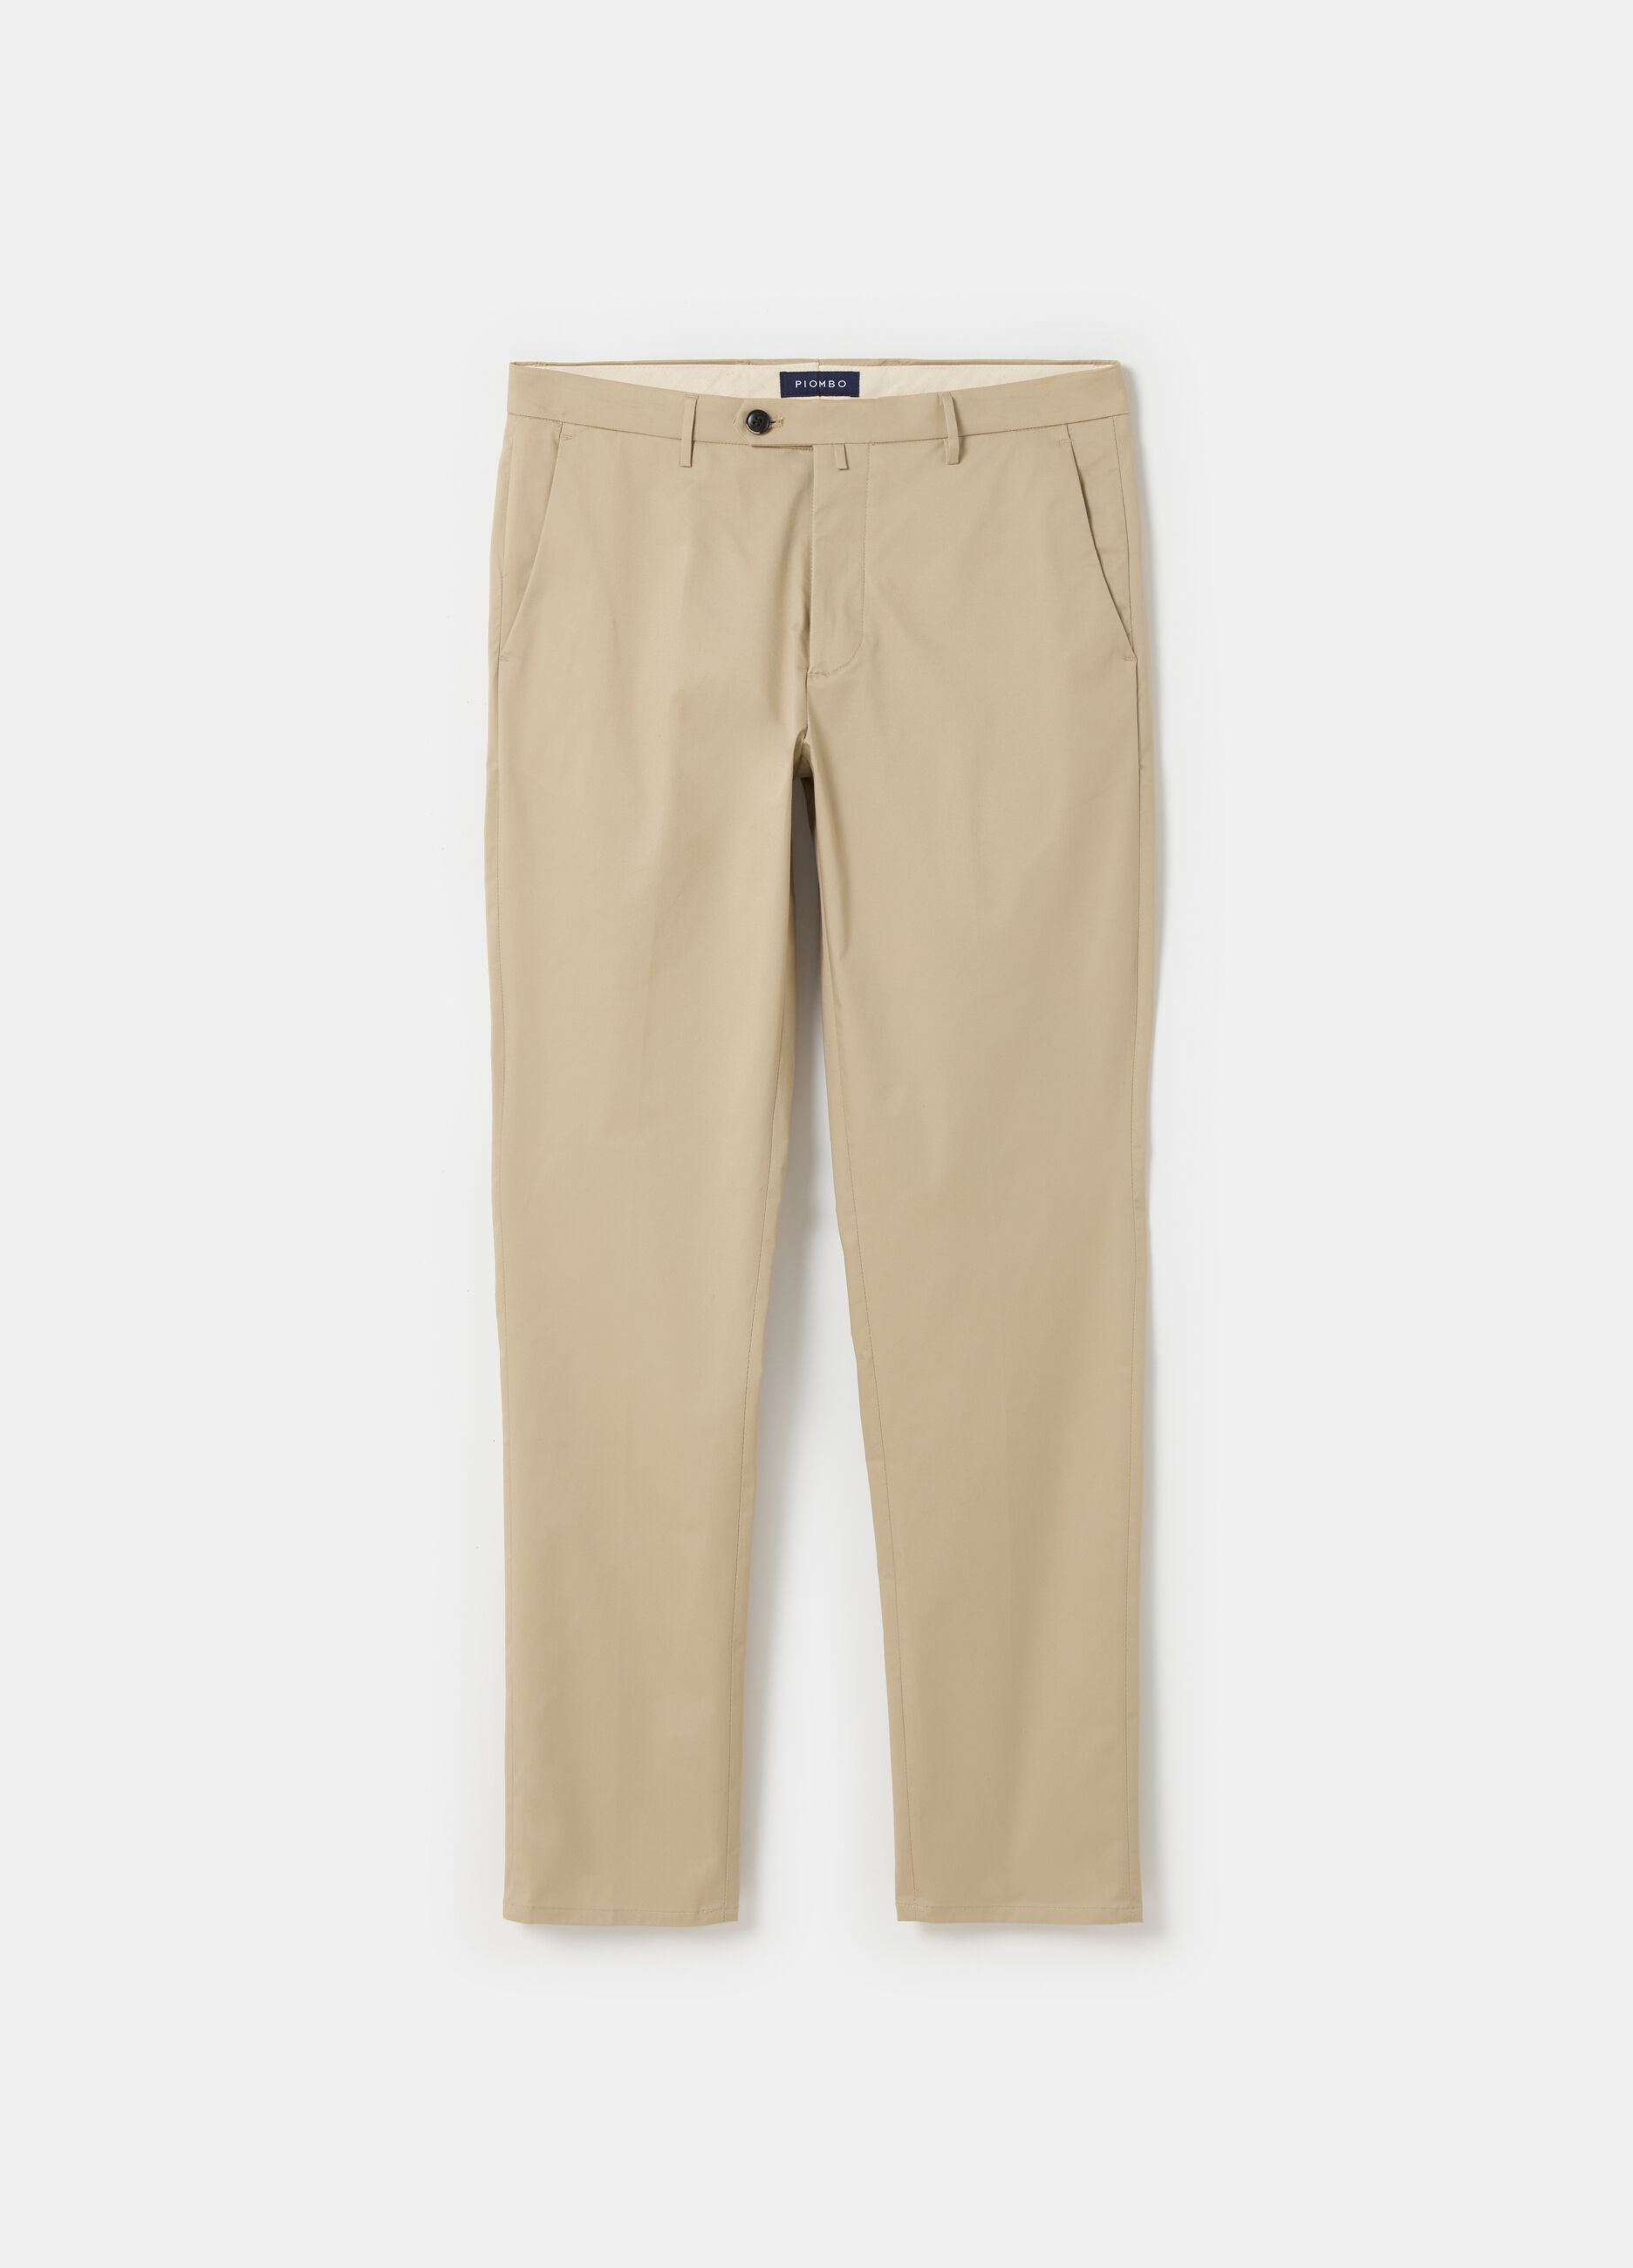 Contemporary chino trousers